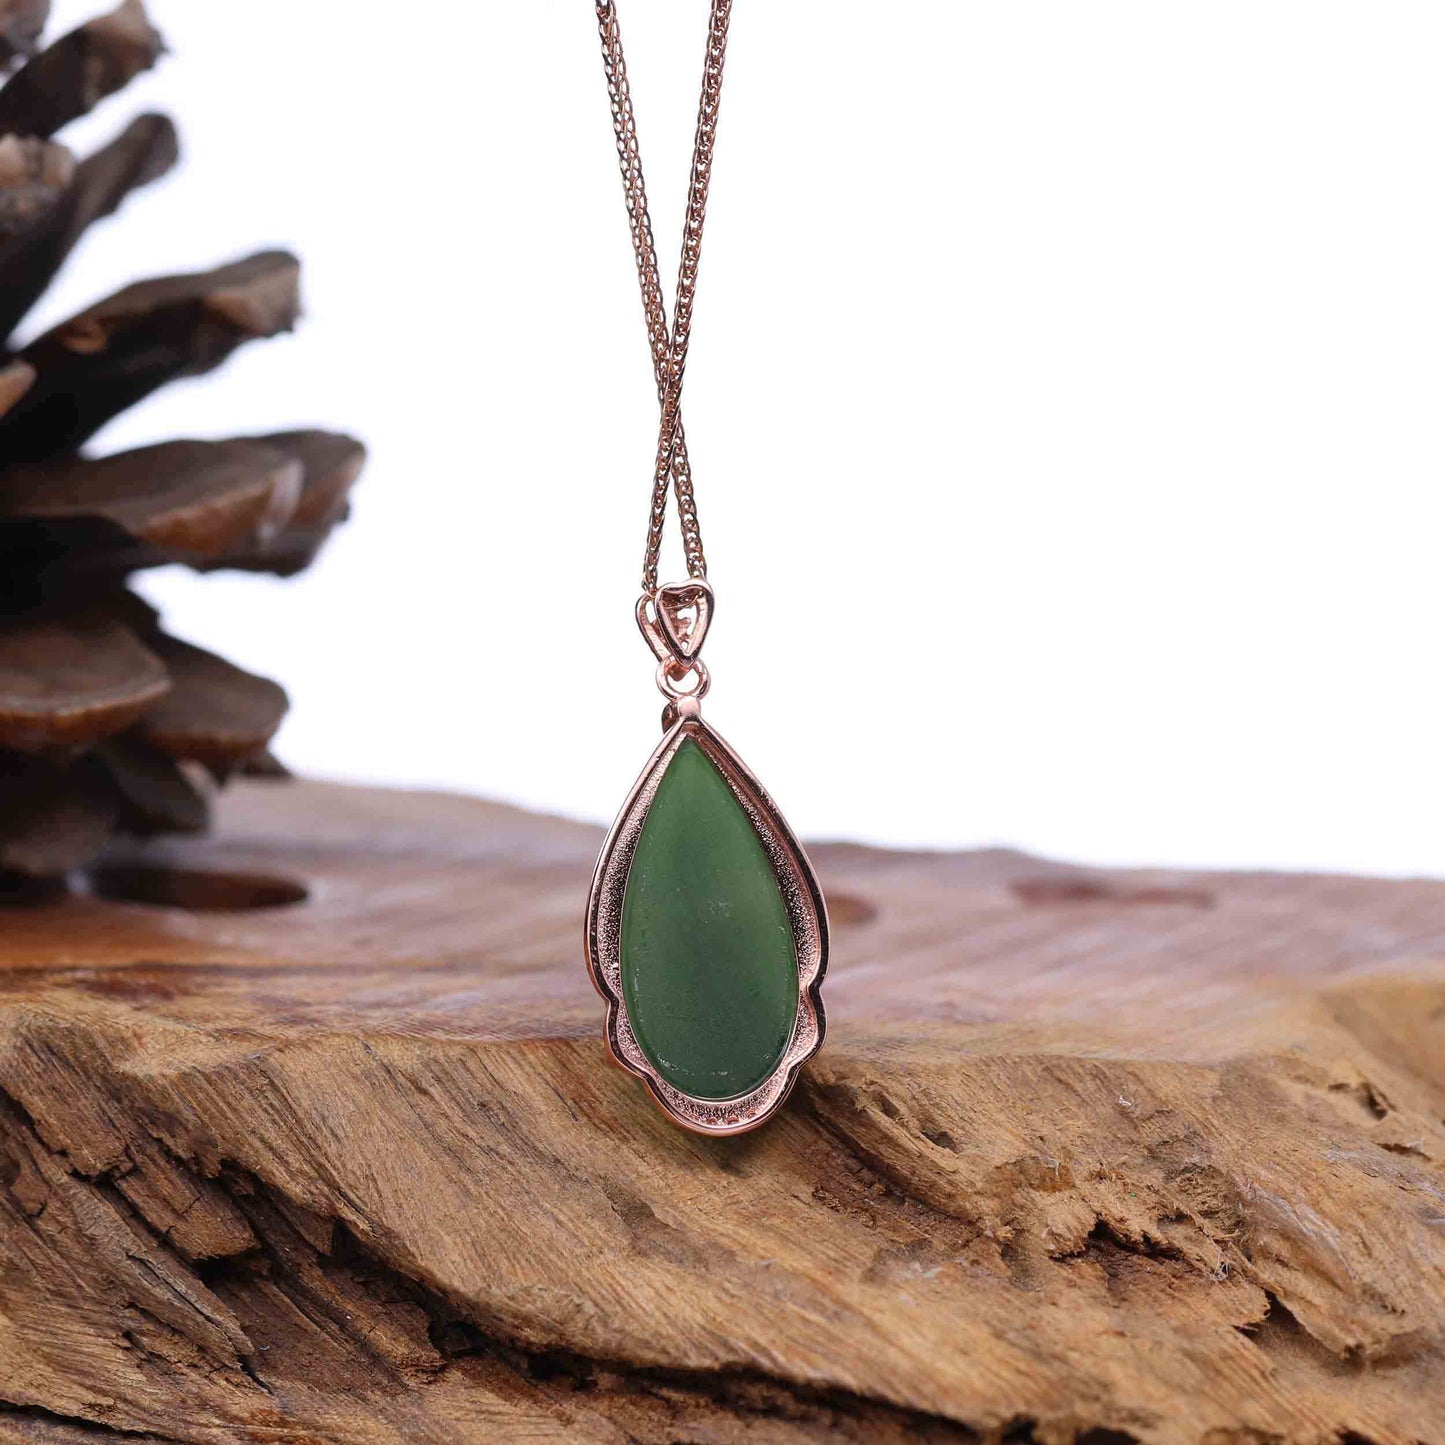 RealJade® Co. Tear-Drop Nephrite Jade Necklace Pendant with 18k Rose Gold Plated